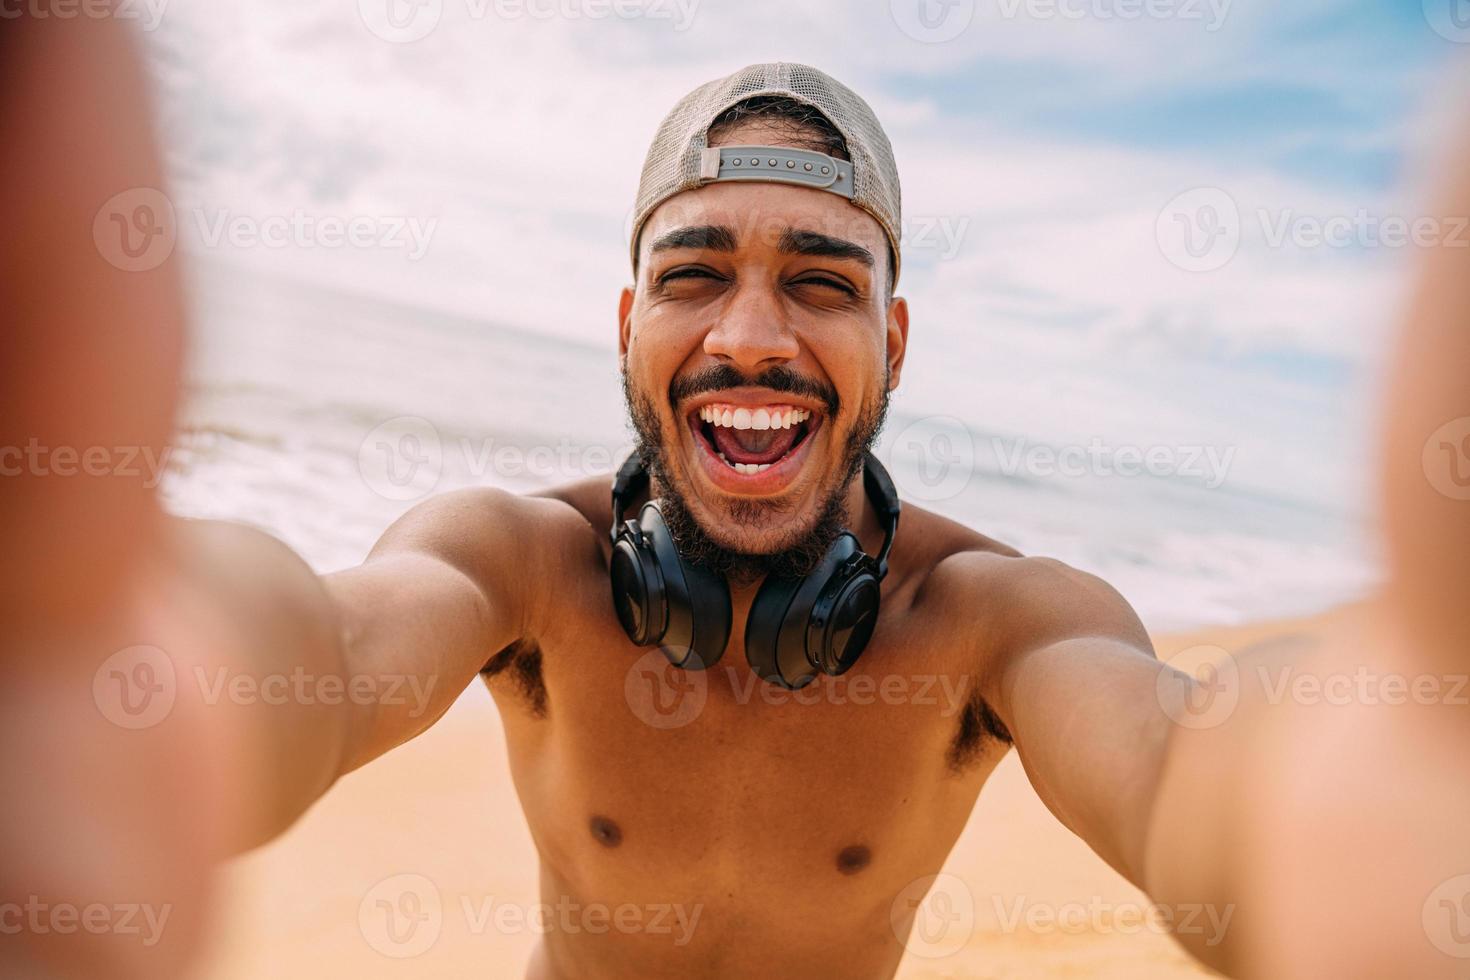 Friendly smiling latin america young man. Man wearing cap and headphones, holding and looking at camera photo